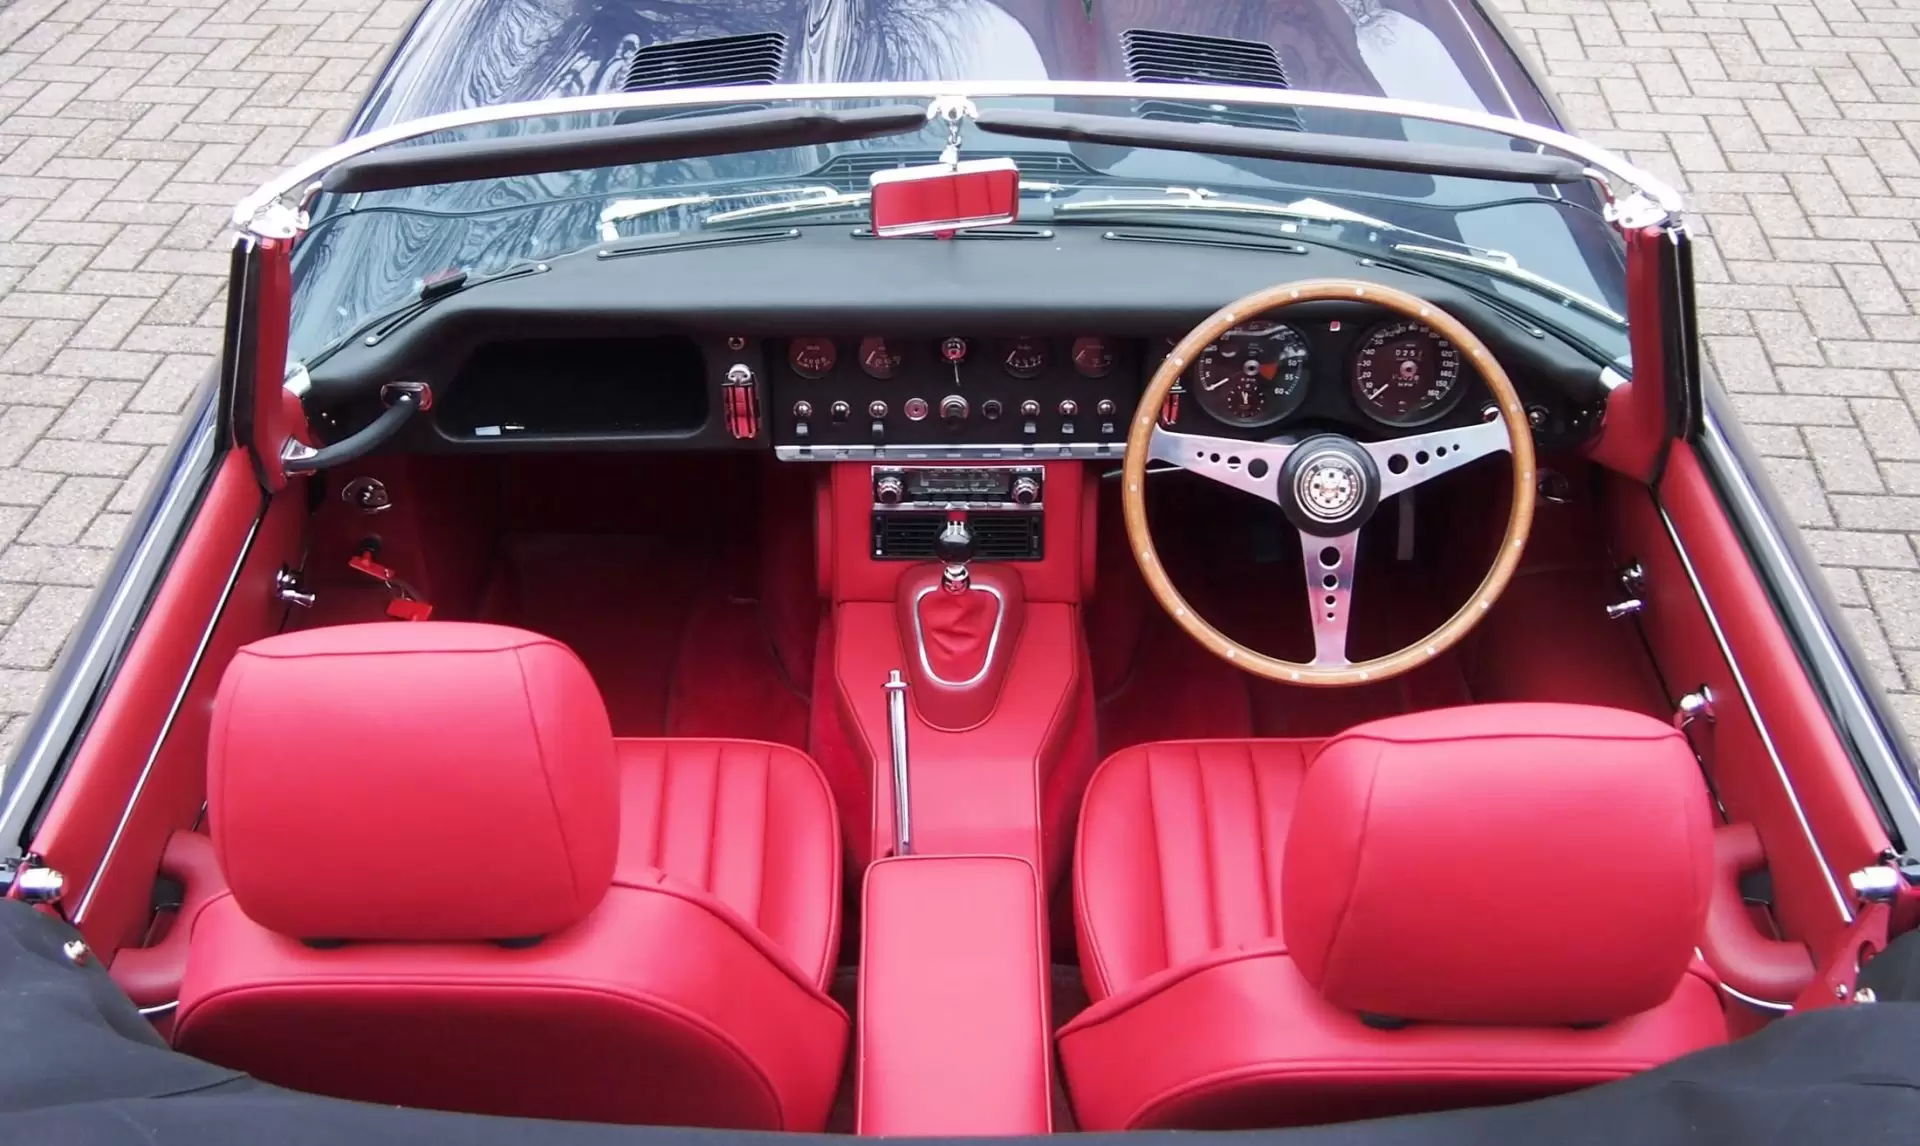 Interior red trim and leather seats inside classic convertible car